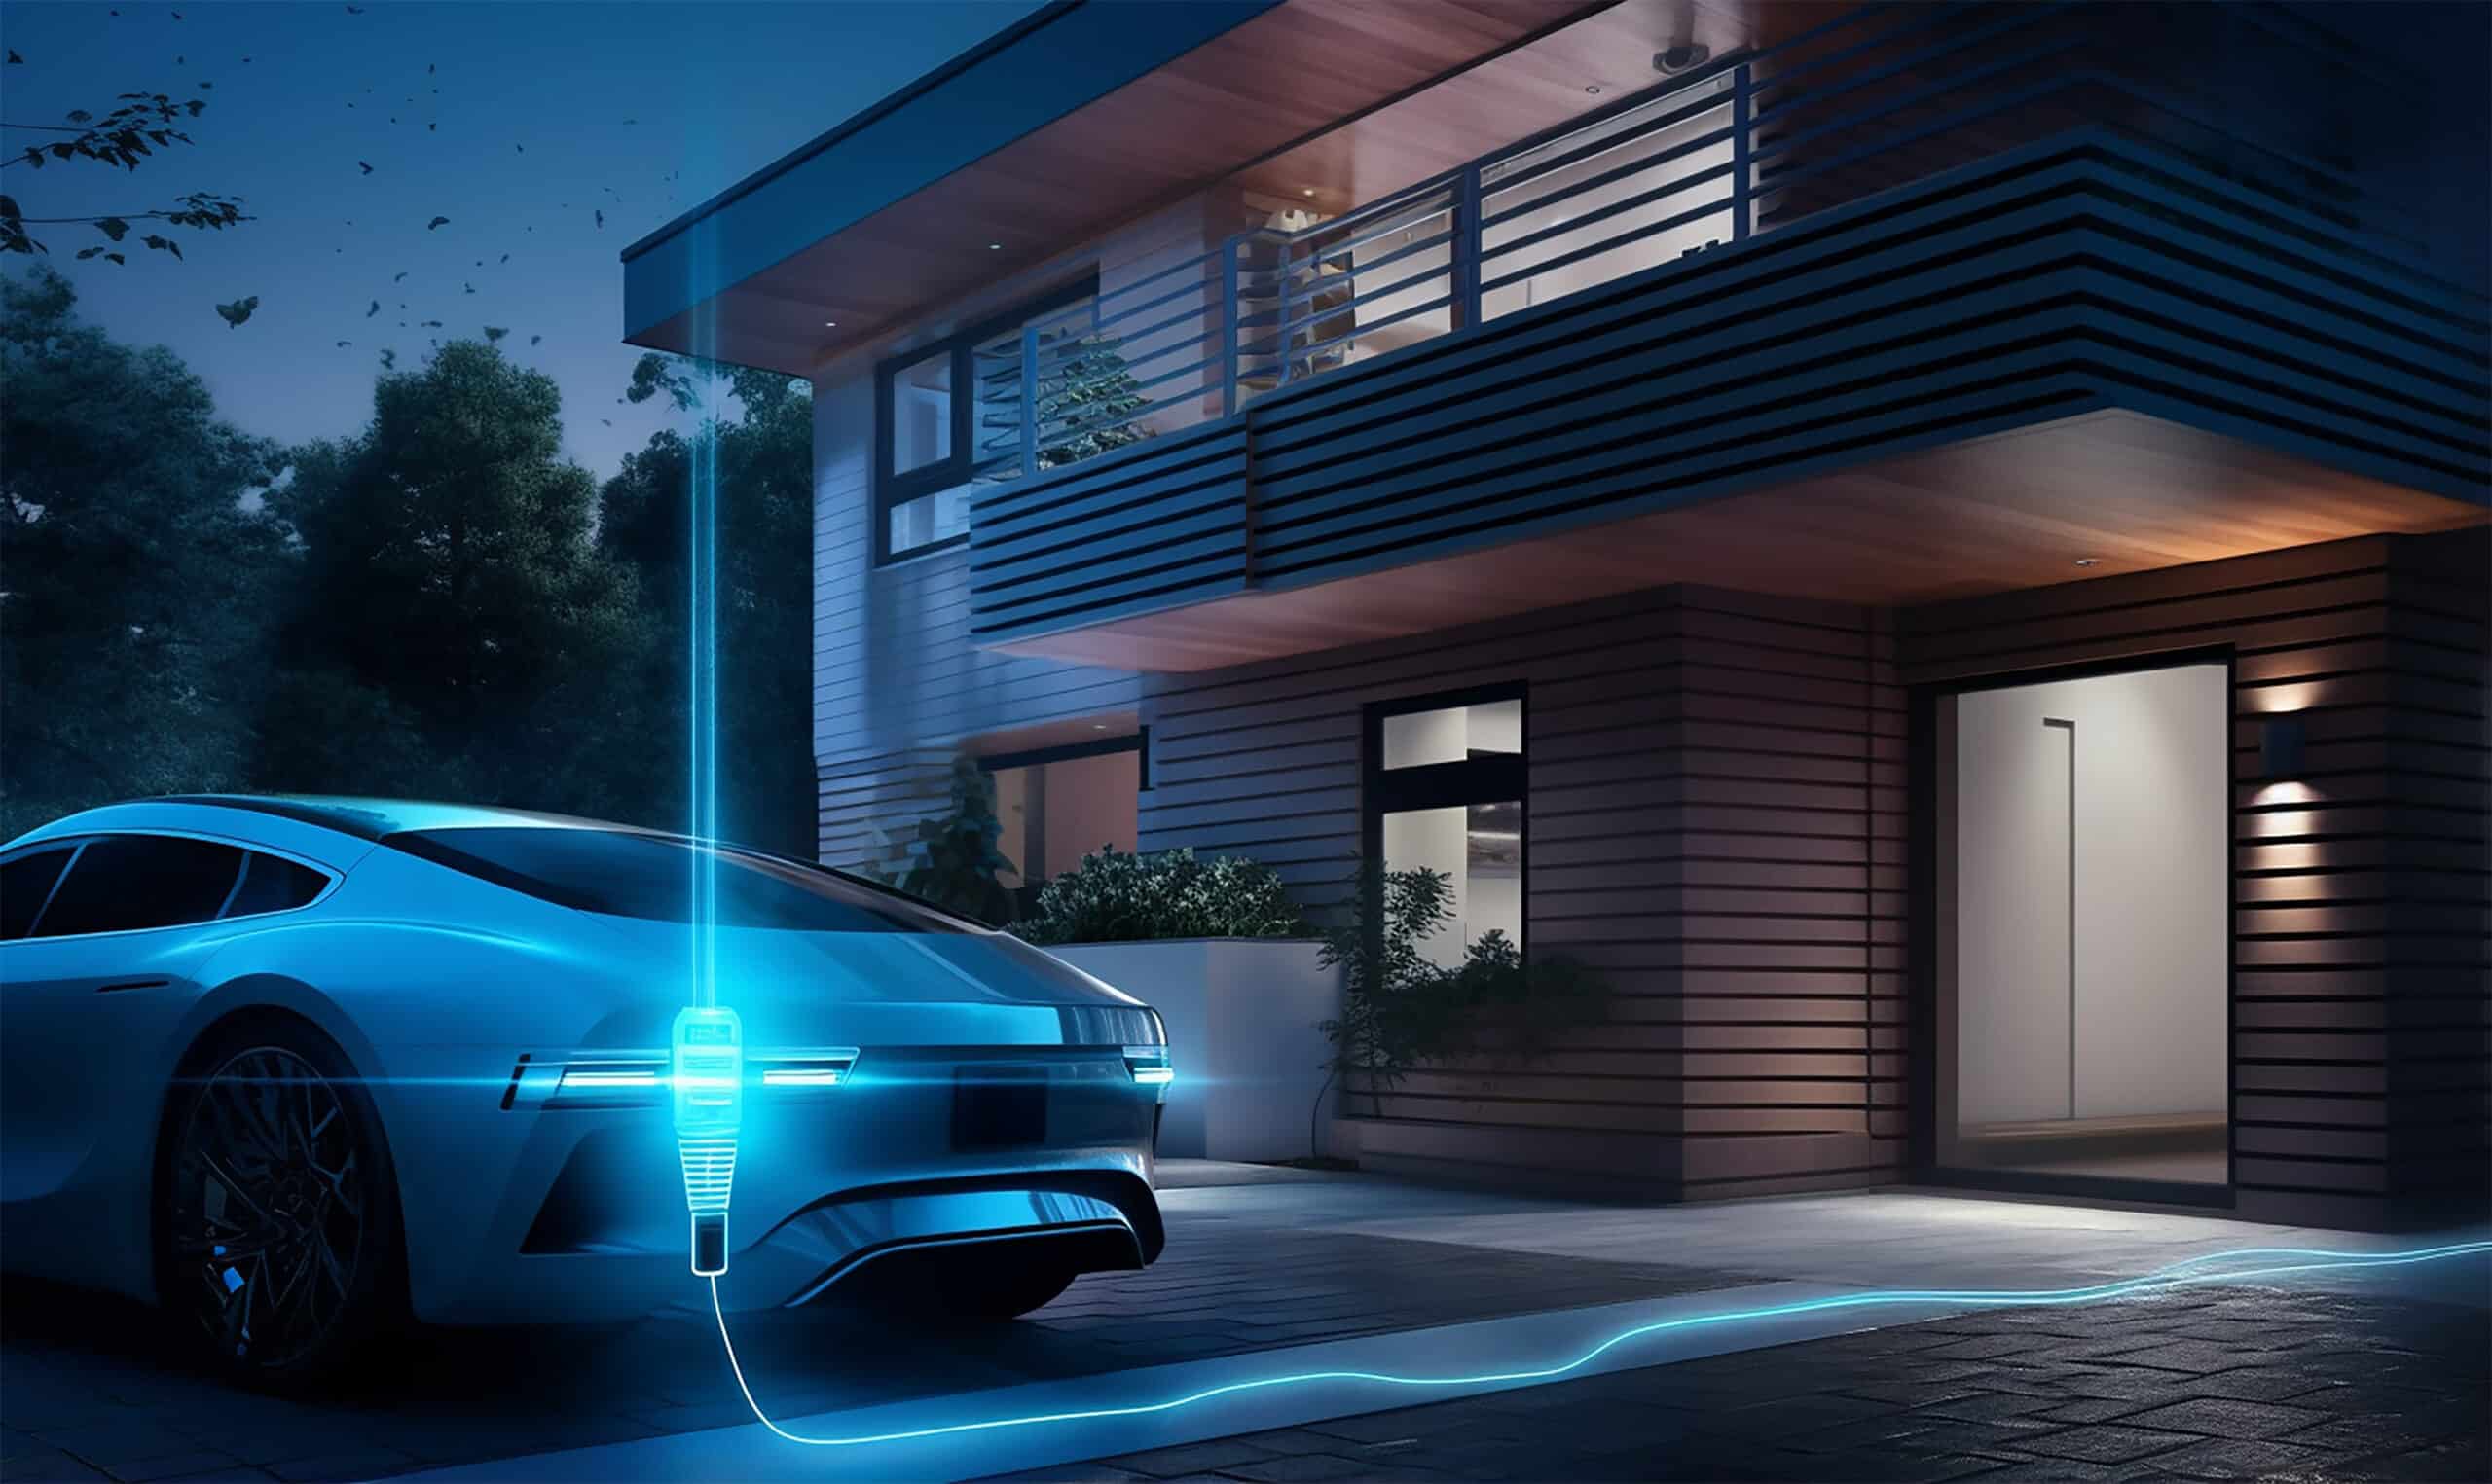 www.appr.com : how to charge electric vehicle at home